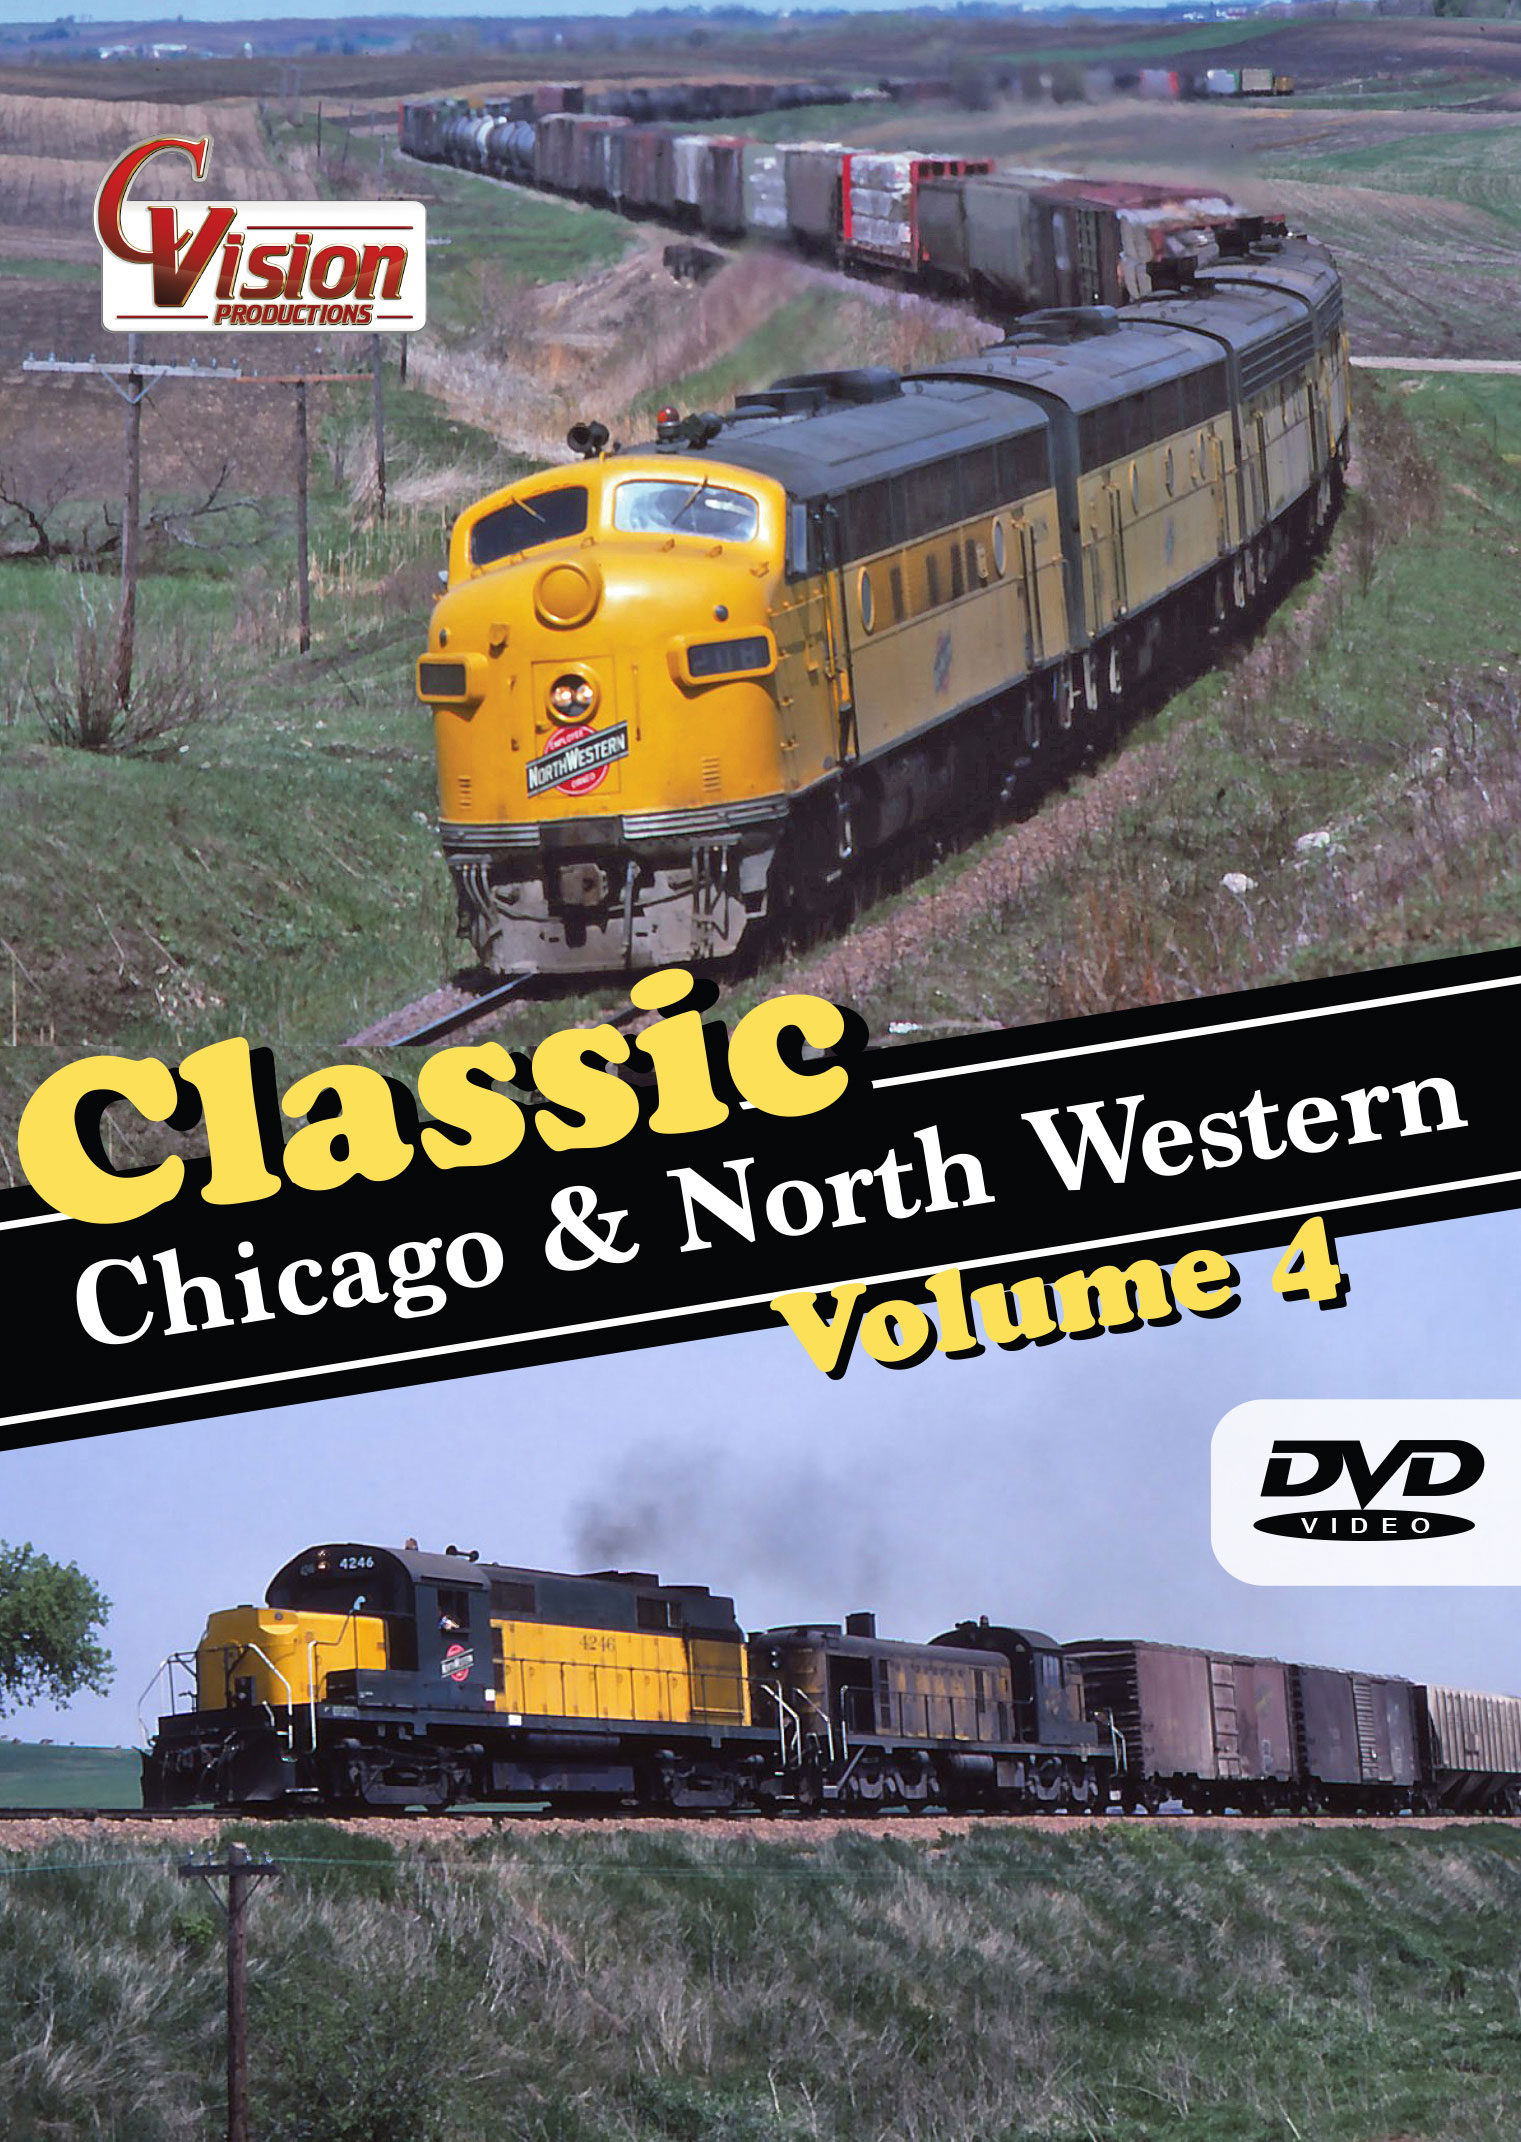 Classic Chicago and North Western Vol 4 DVD C Vision Productions CNW4